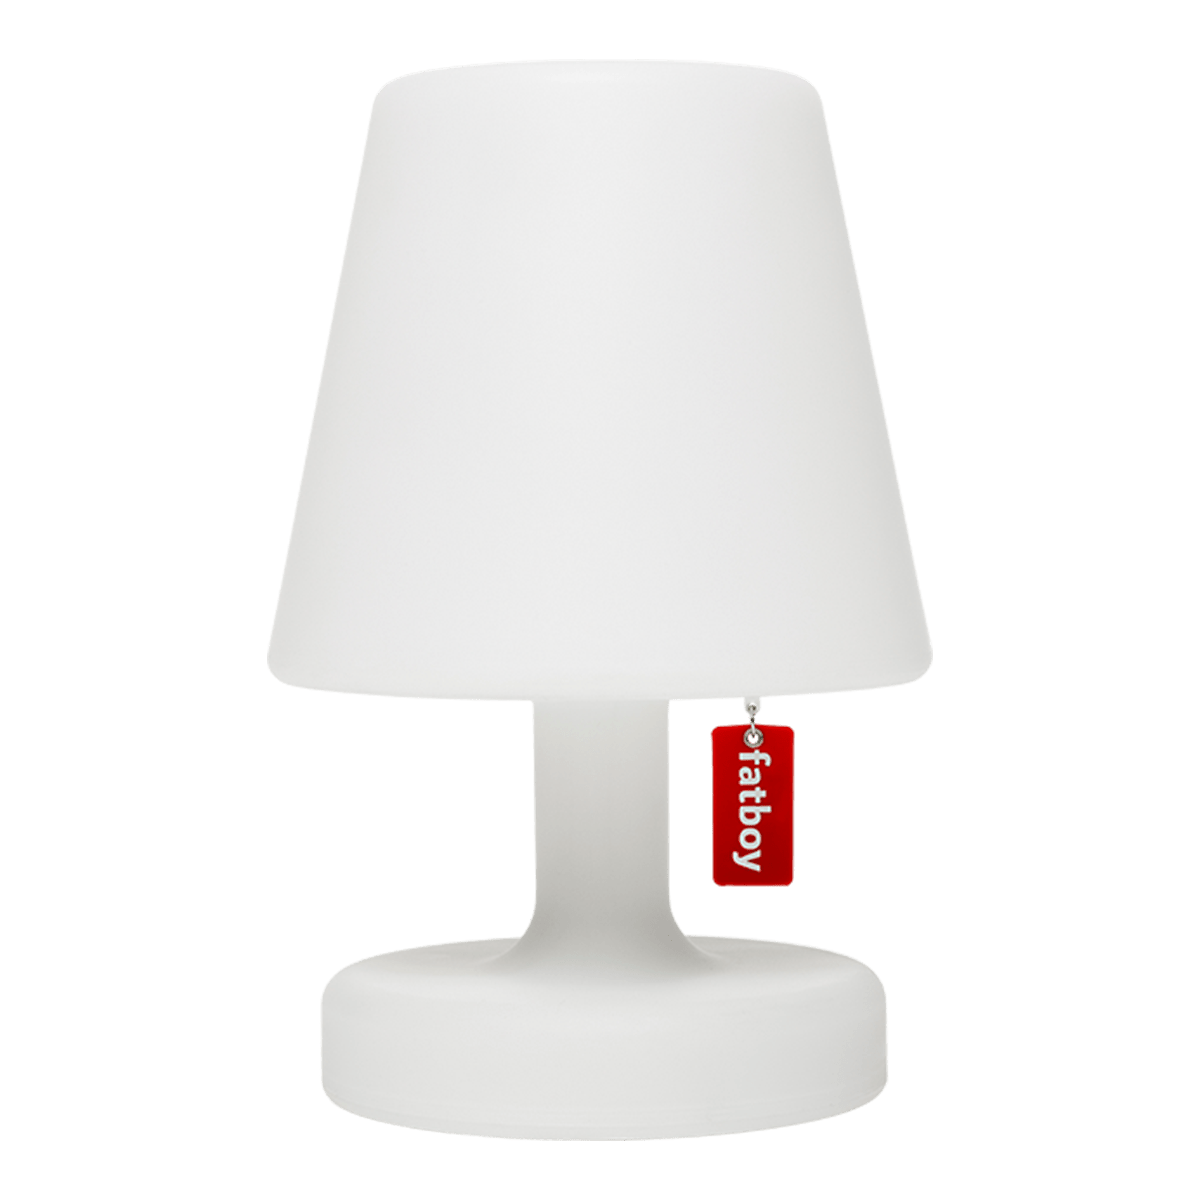 timmerman lenen Dank je Edison the Petit: white table lamp for indoor & outdoor use | Fatboy